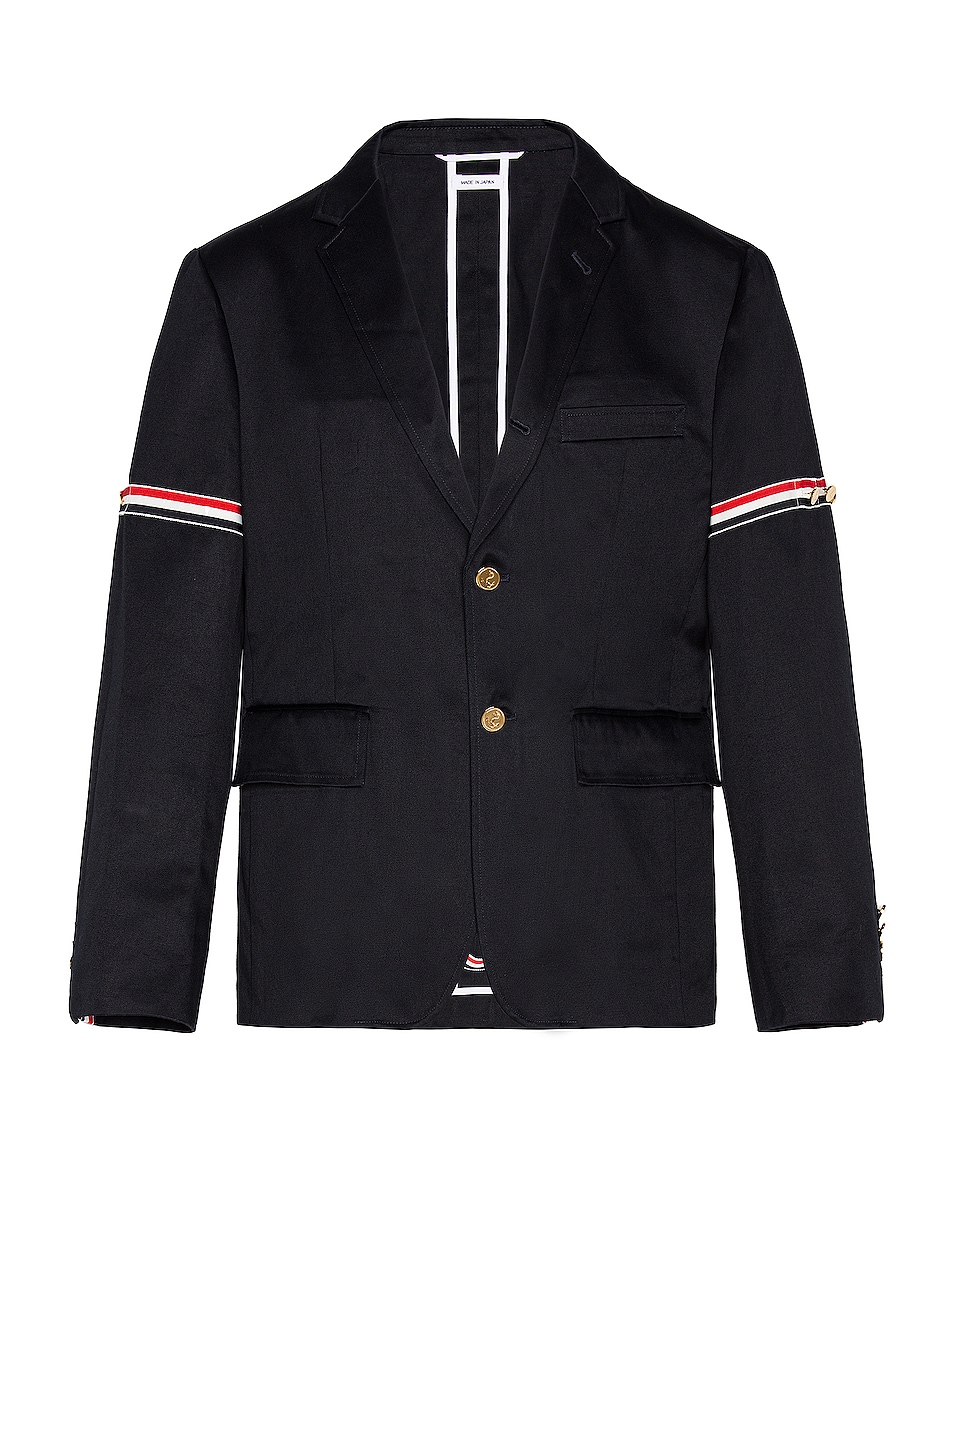 Thom Browne Unconstructed GG Armband Jacket in Navy | FWRD